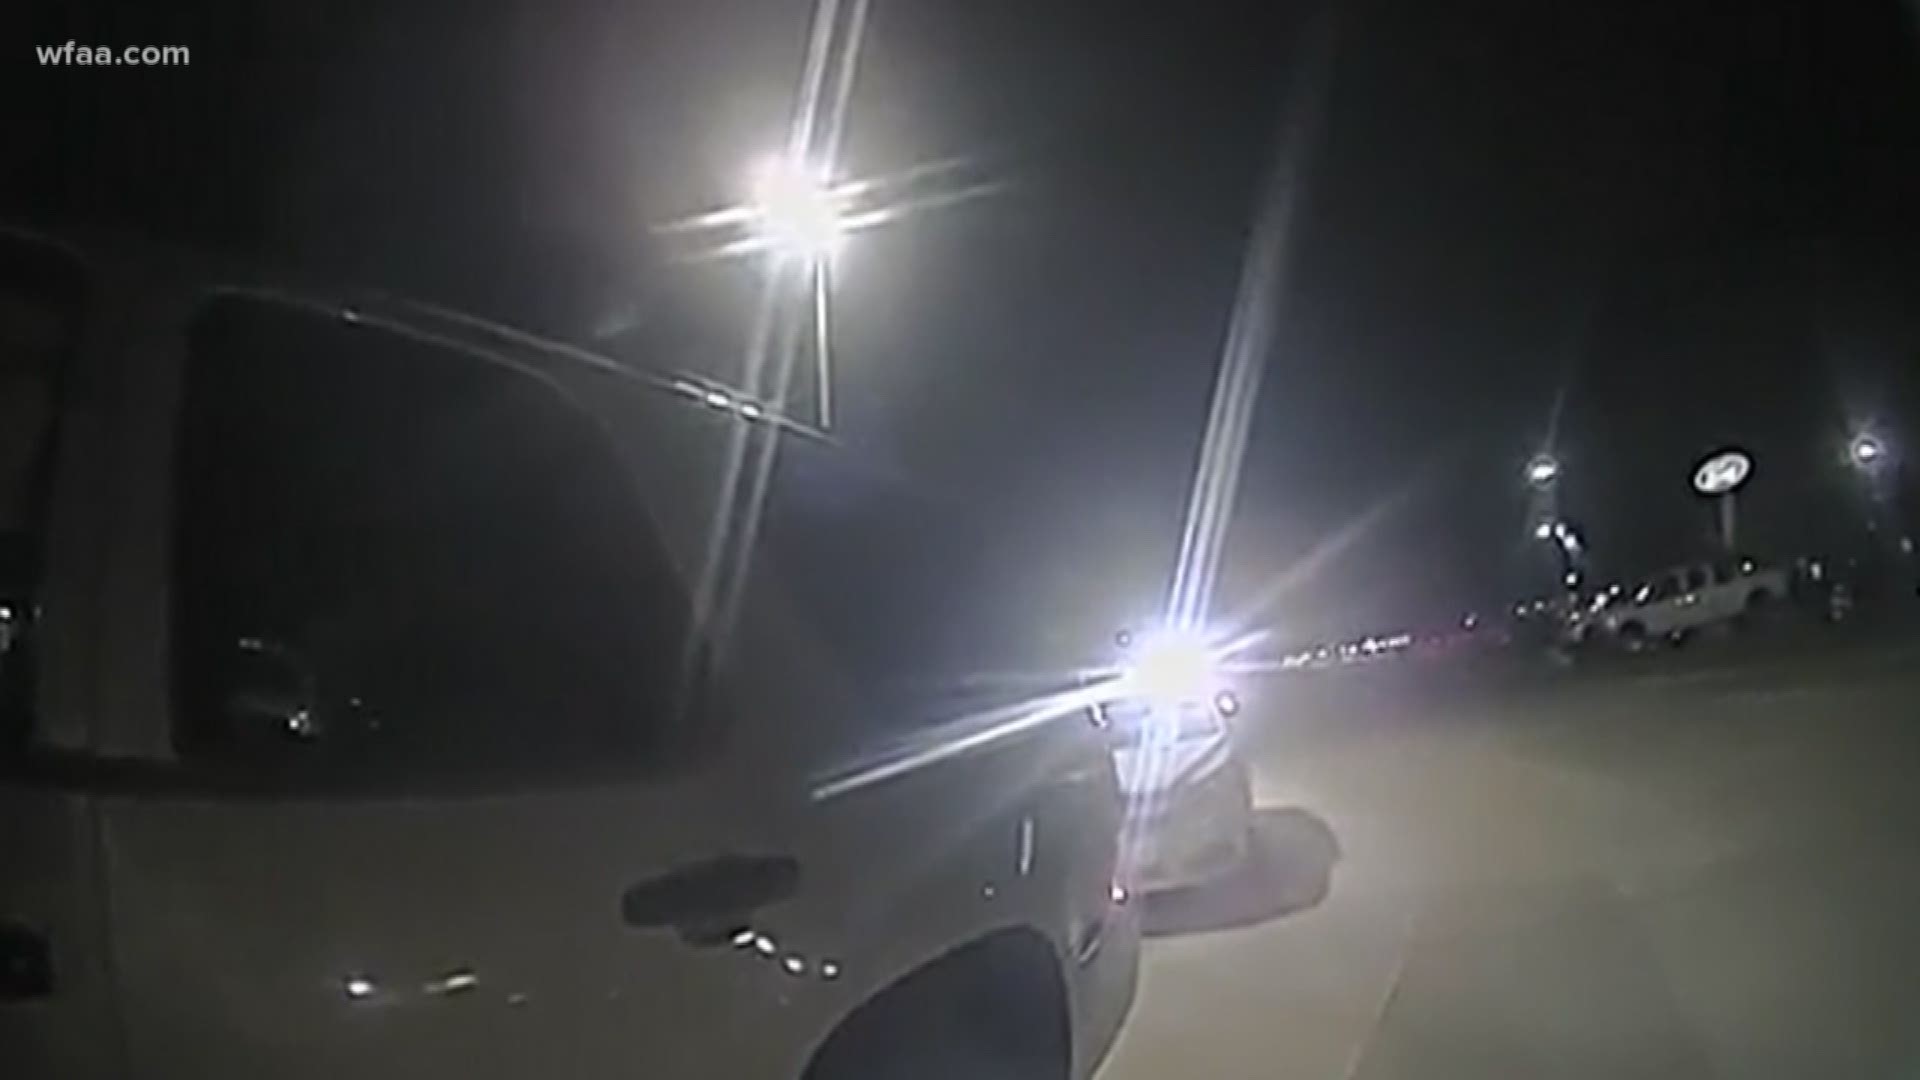 Body Camera Footage Clears Texas Trooper Accused Of Sexual Assault